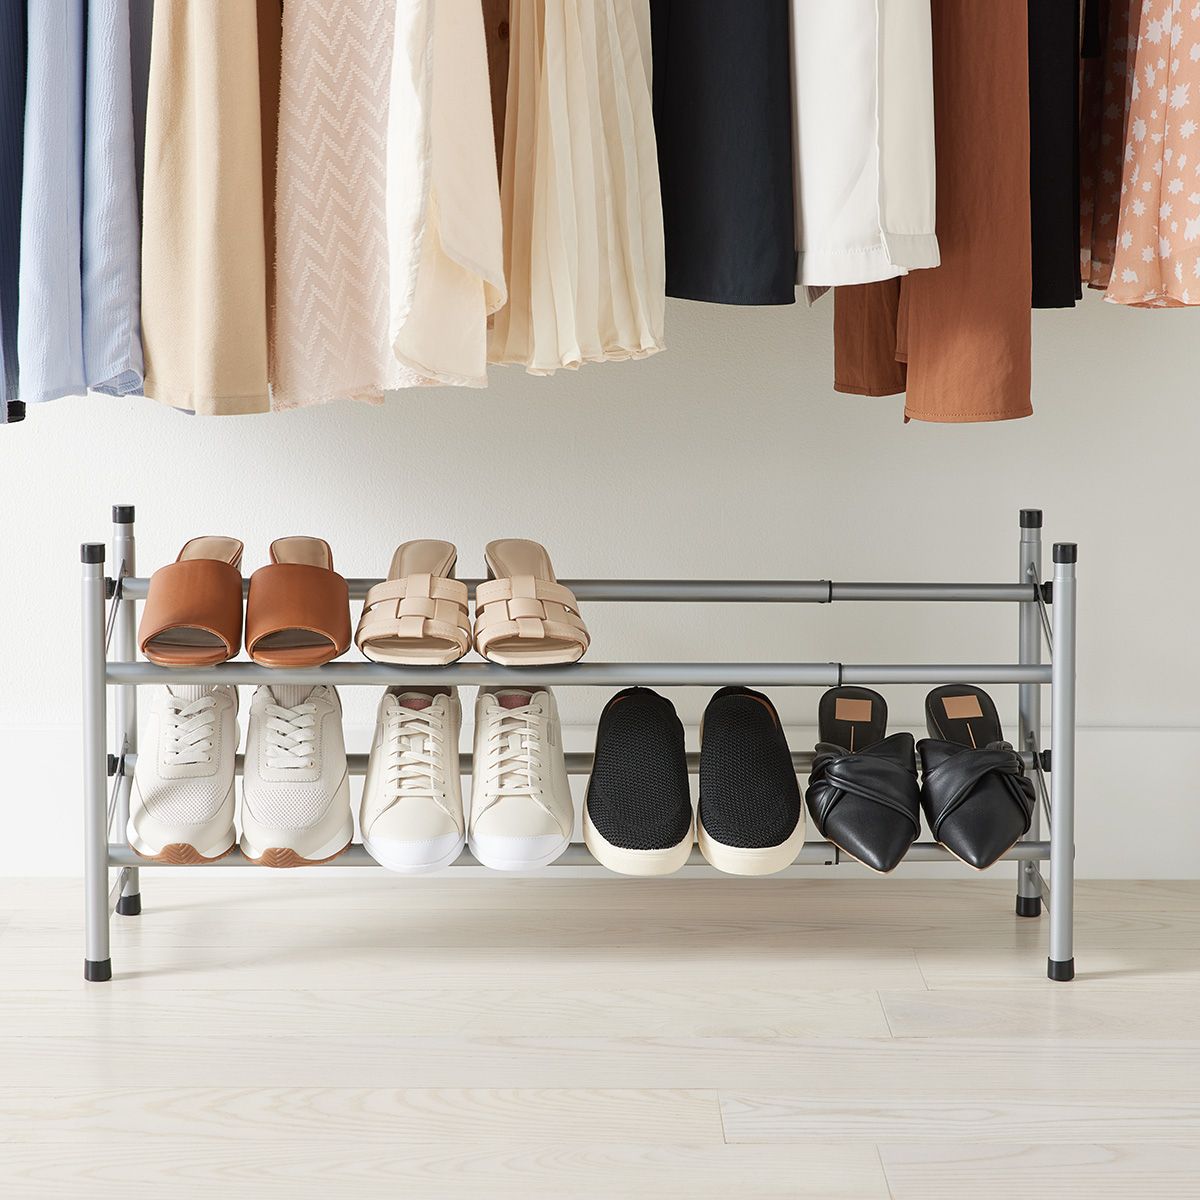 Platinum 2 Tier Adjustable Shoe Rack | The Container Store Pertaining To 2 Tier Adjustable Wardrobes (View 11 of 15)